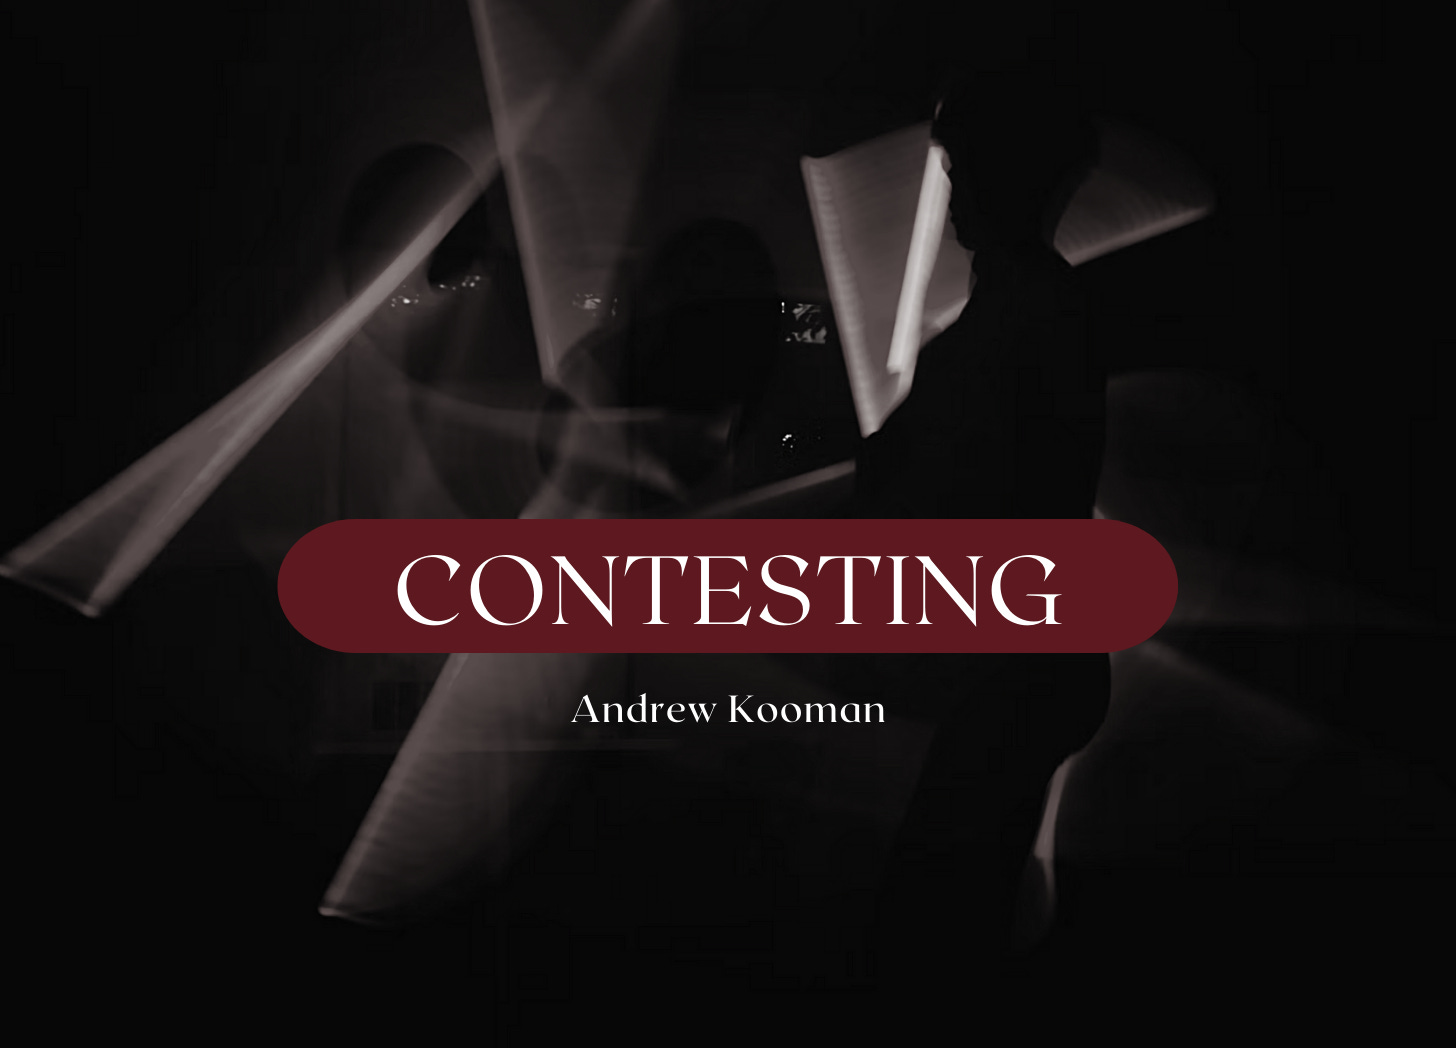 Contesting: A new thriller by Andrew Kooman